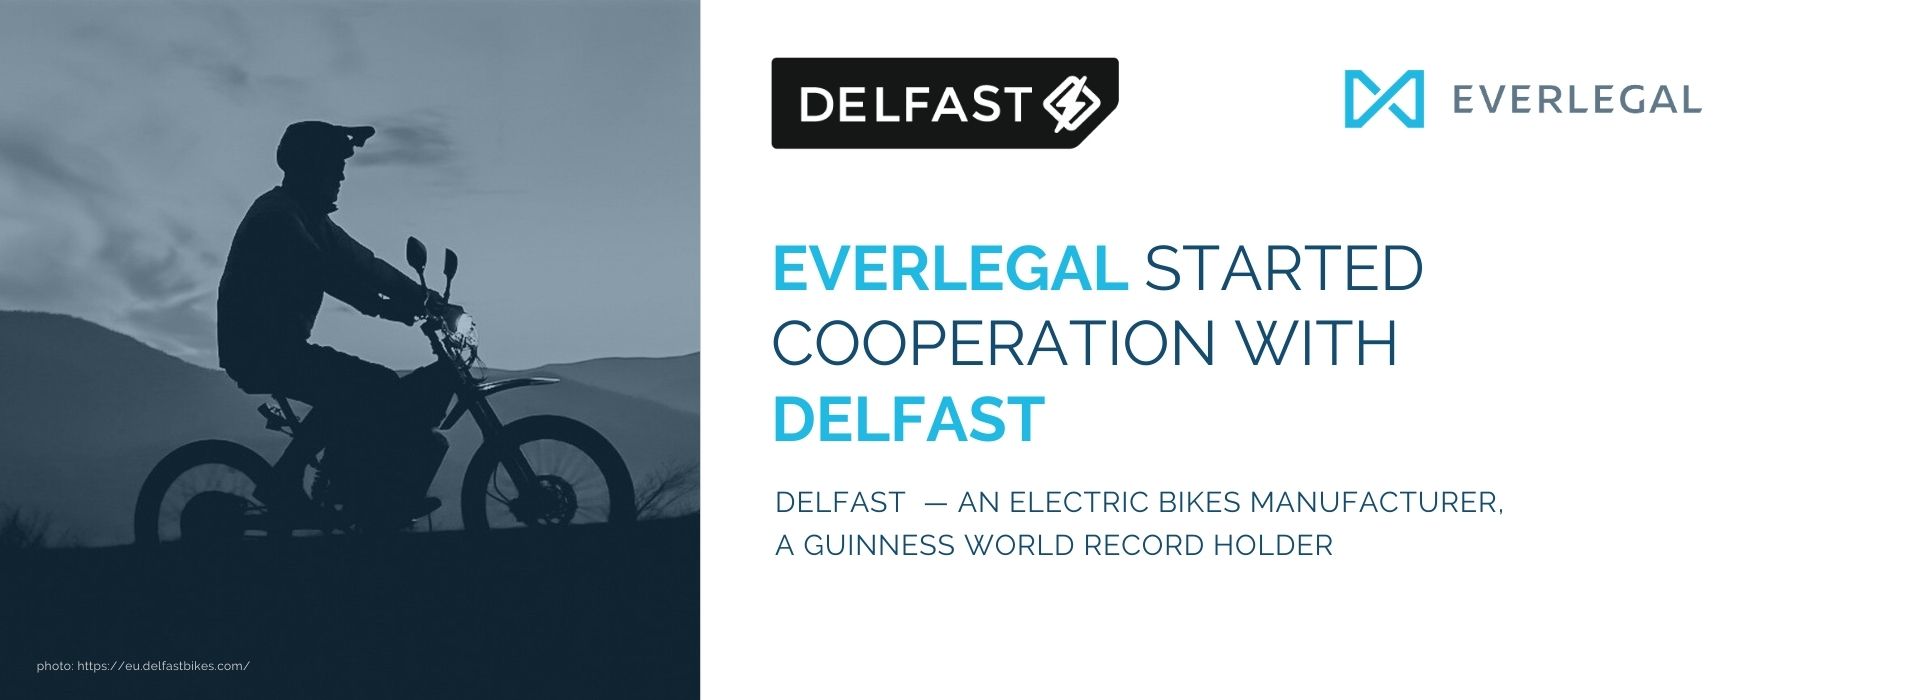 EVERLEGAL Started Cooperation with DELFAST